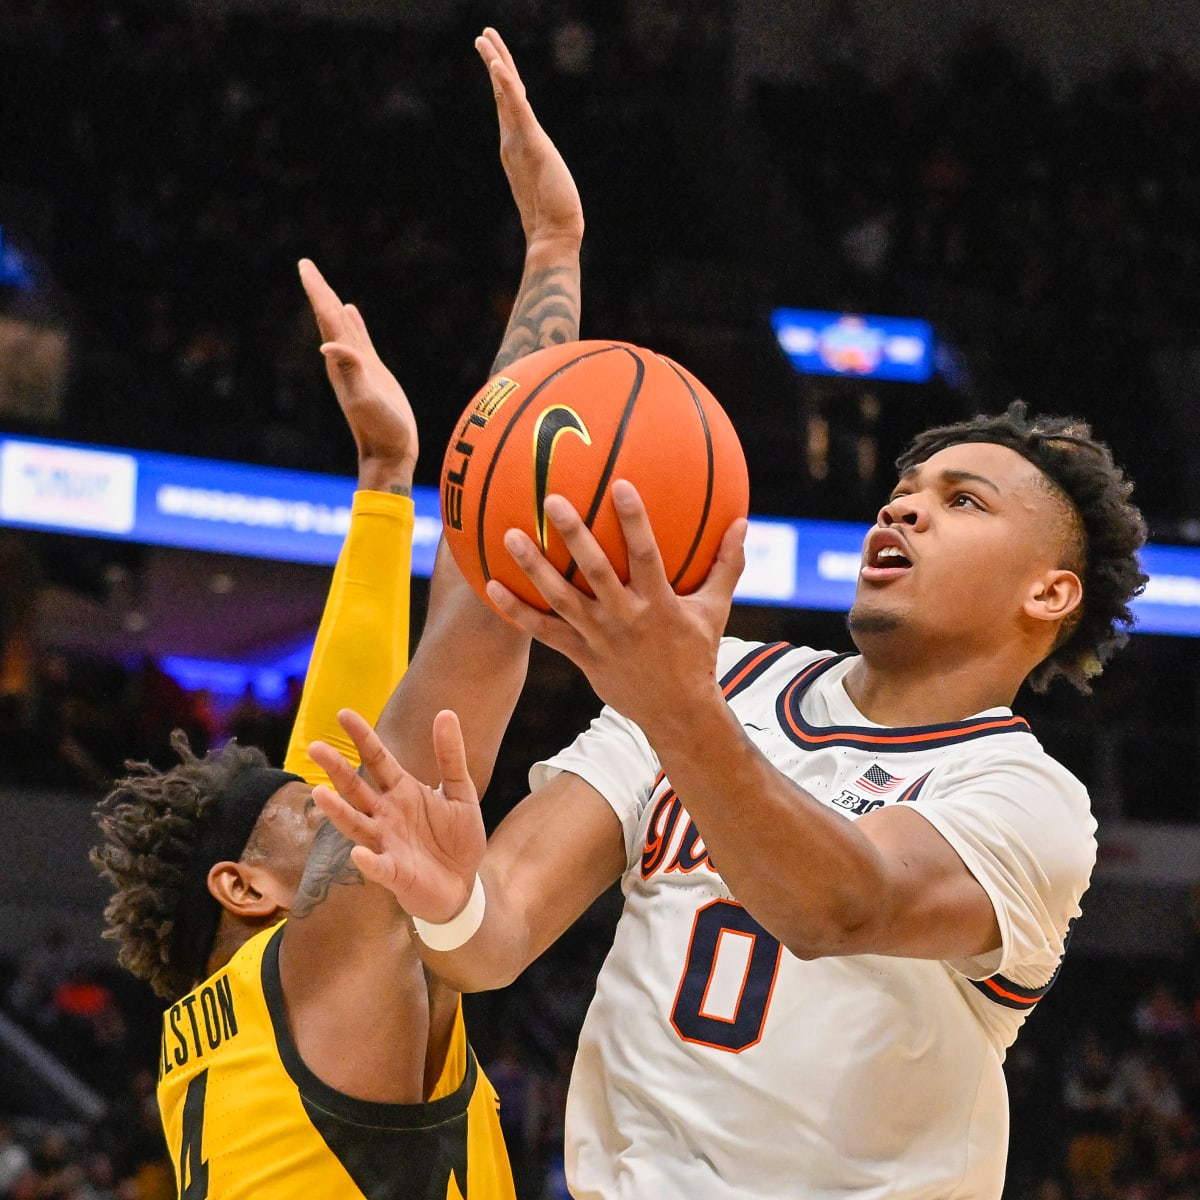 Bethune-Cookman at Illinois Free Live Stream College Basketball - How to Watch and Stream Major League and College Sports